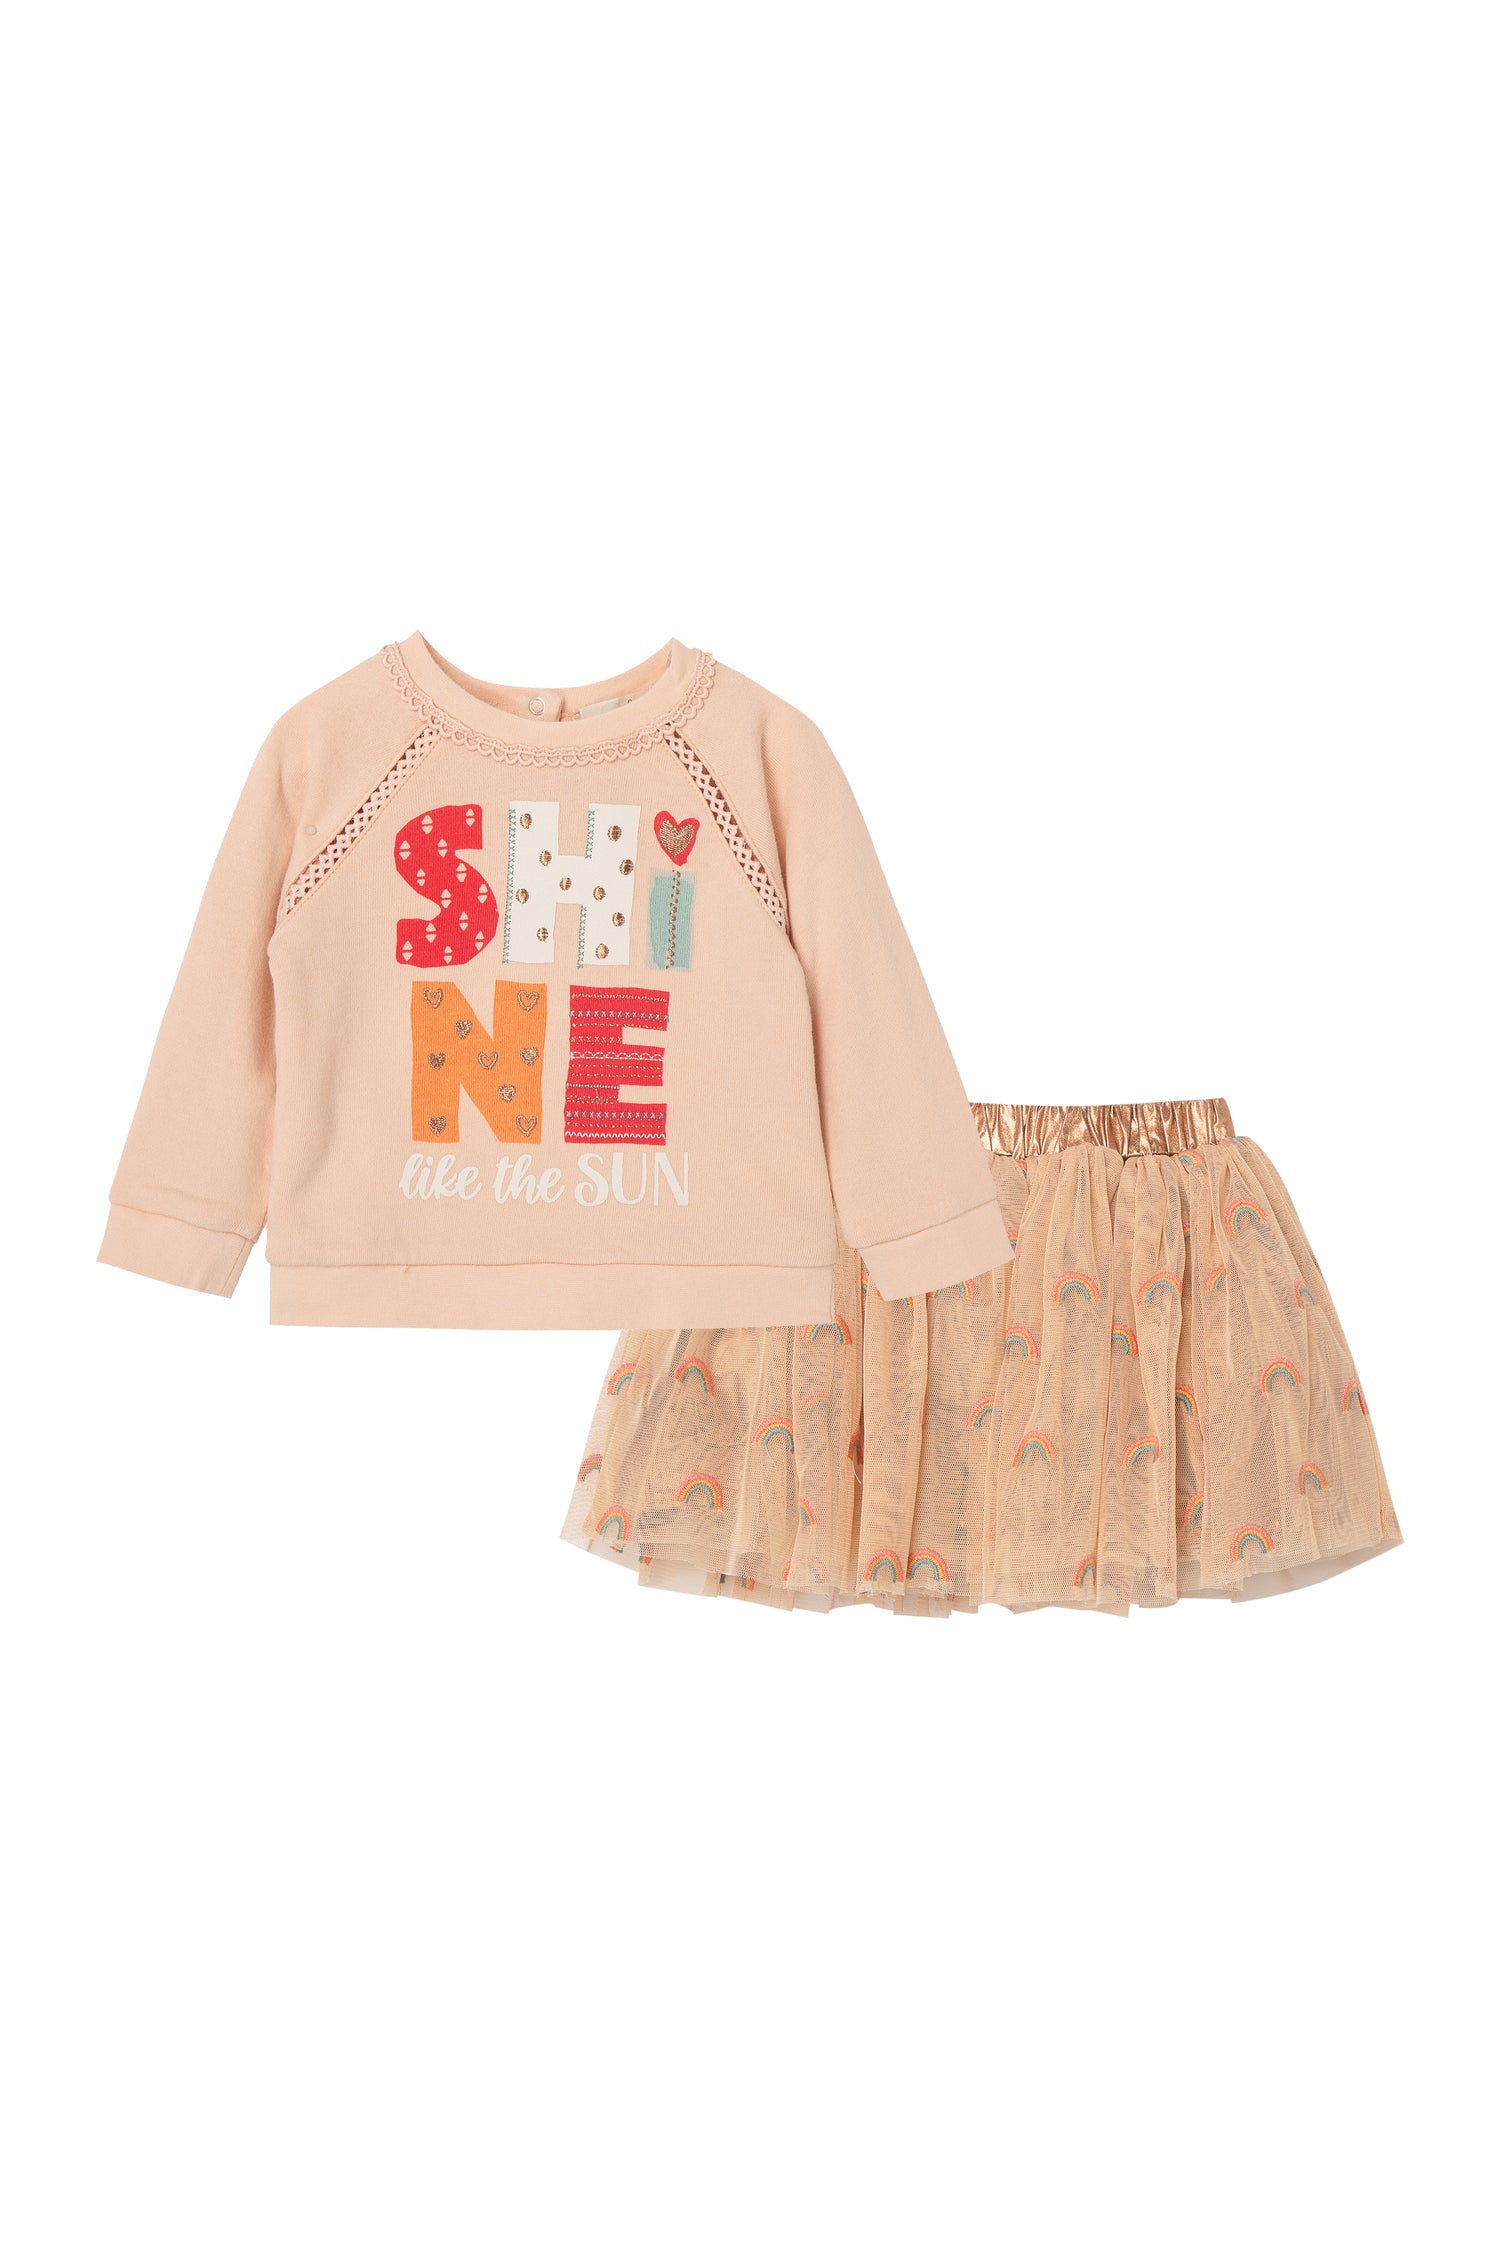 Front view of pink sweatshirt and tulle skirt set with "shine like the sun" wording 